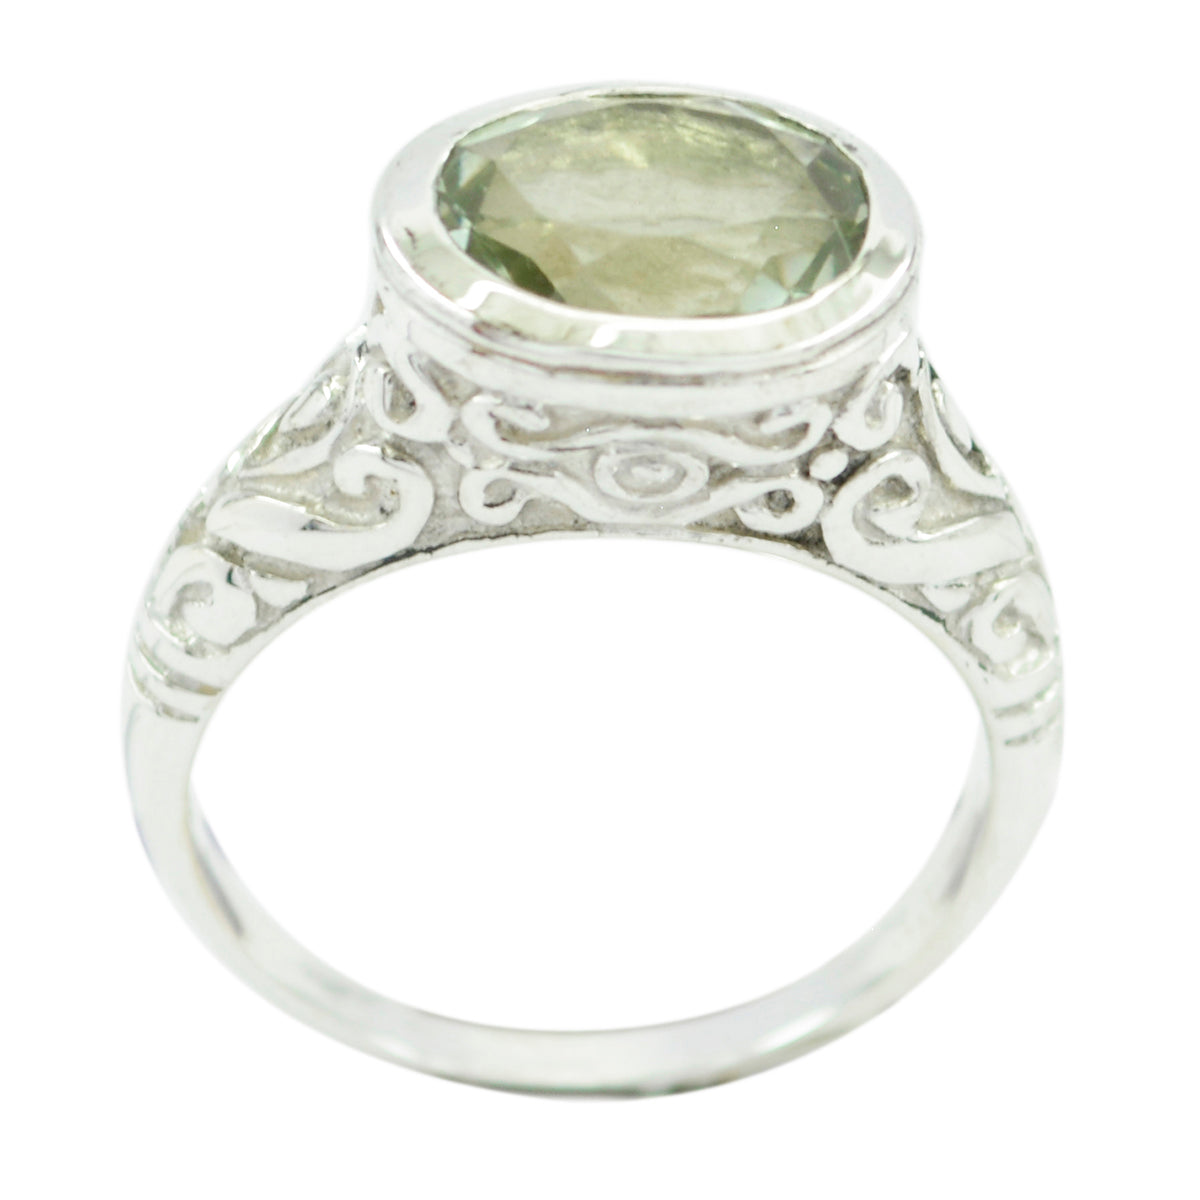 Inviting Gems Green Amethyst Sterling Silver Ring Great Selling Item